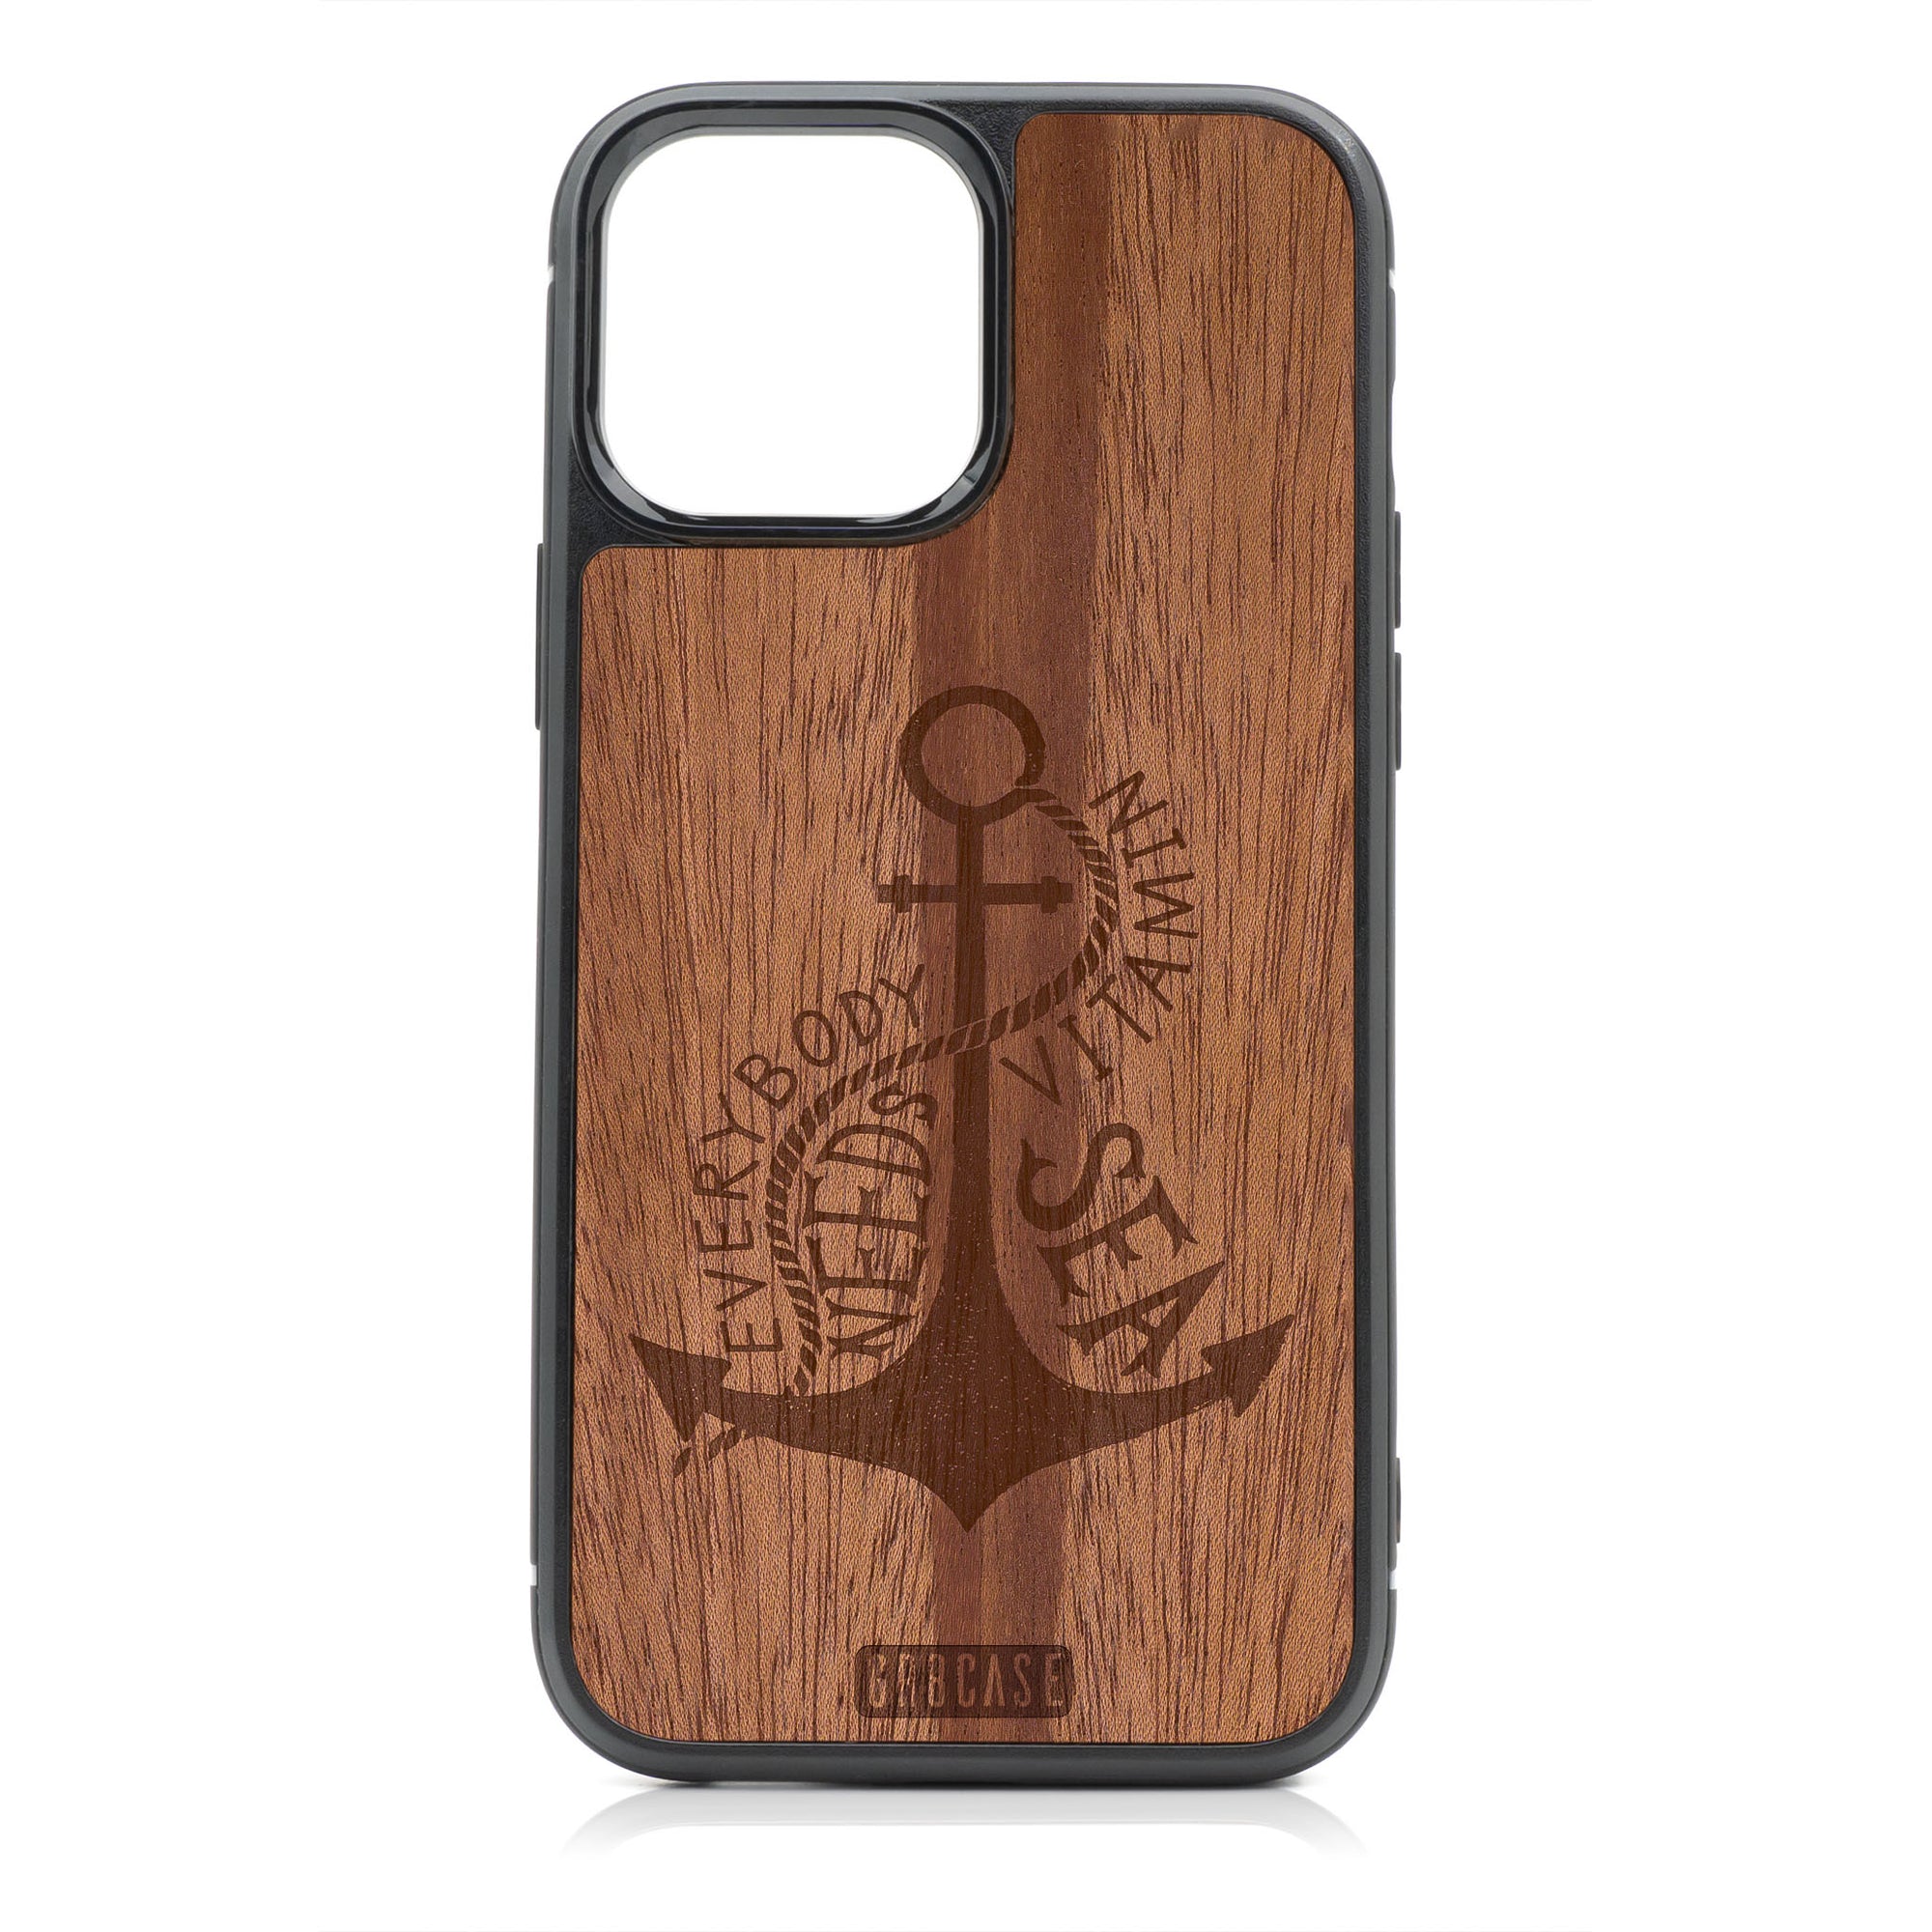 Everybody Needs Vitamin Sea (Anchor) Design Wood Case For iPhone 13 Pro